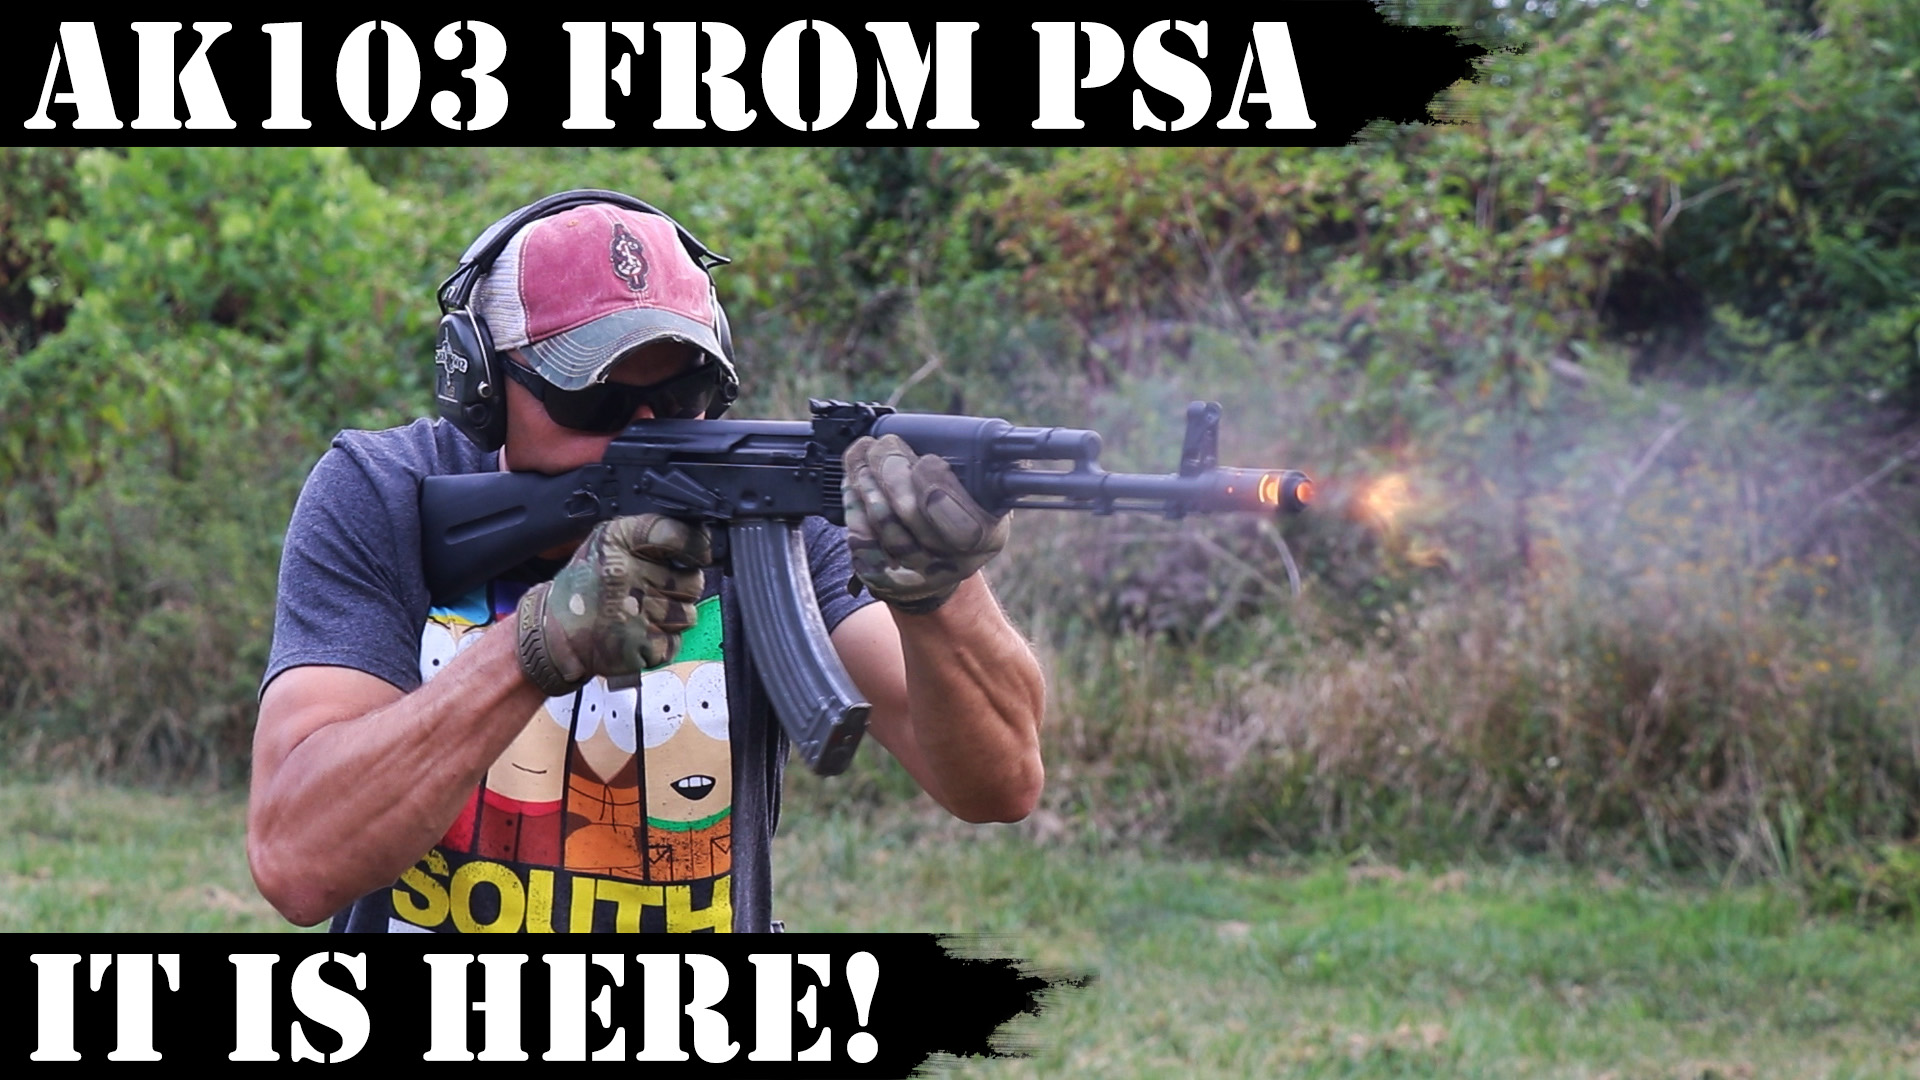 AK 103 from PSA – It’s here!